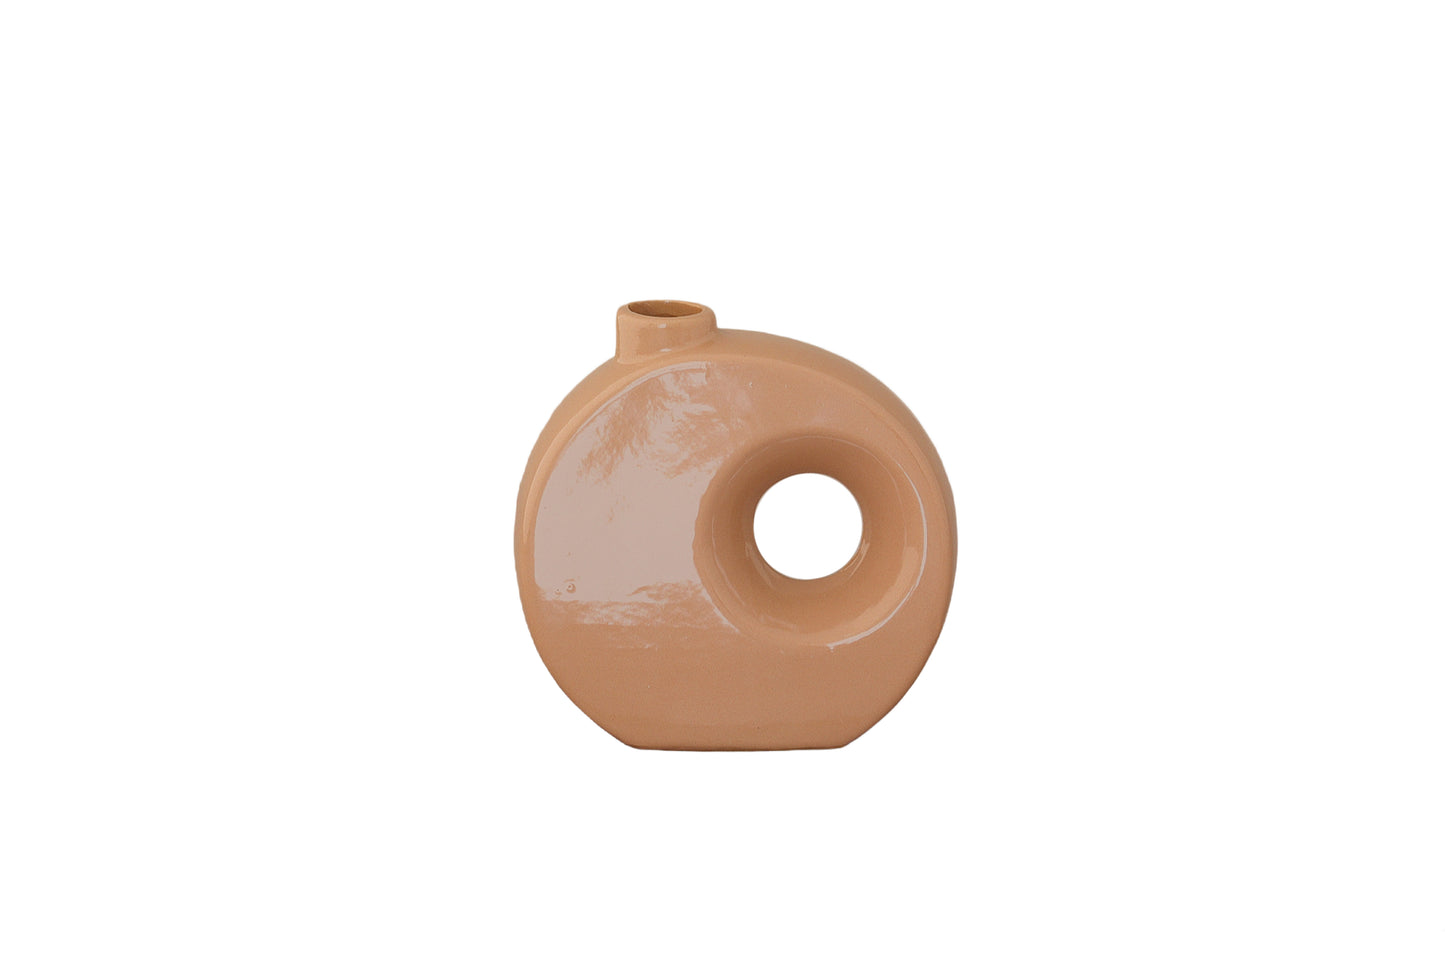 Ceramic Oval Vase with Narrow Mouth and Side Hole Design Matte Finish